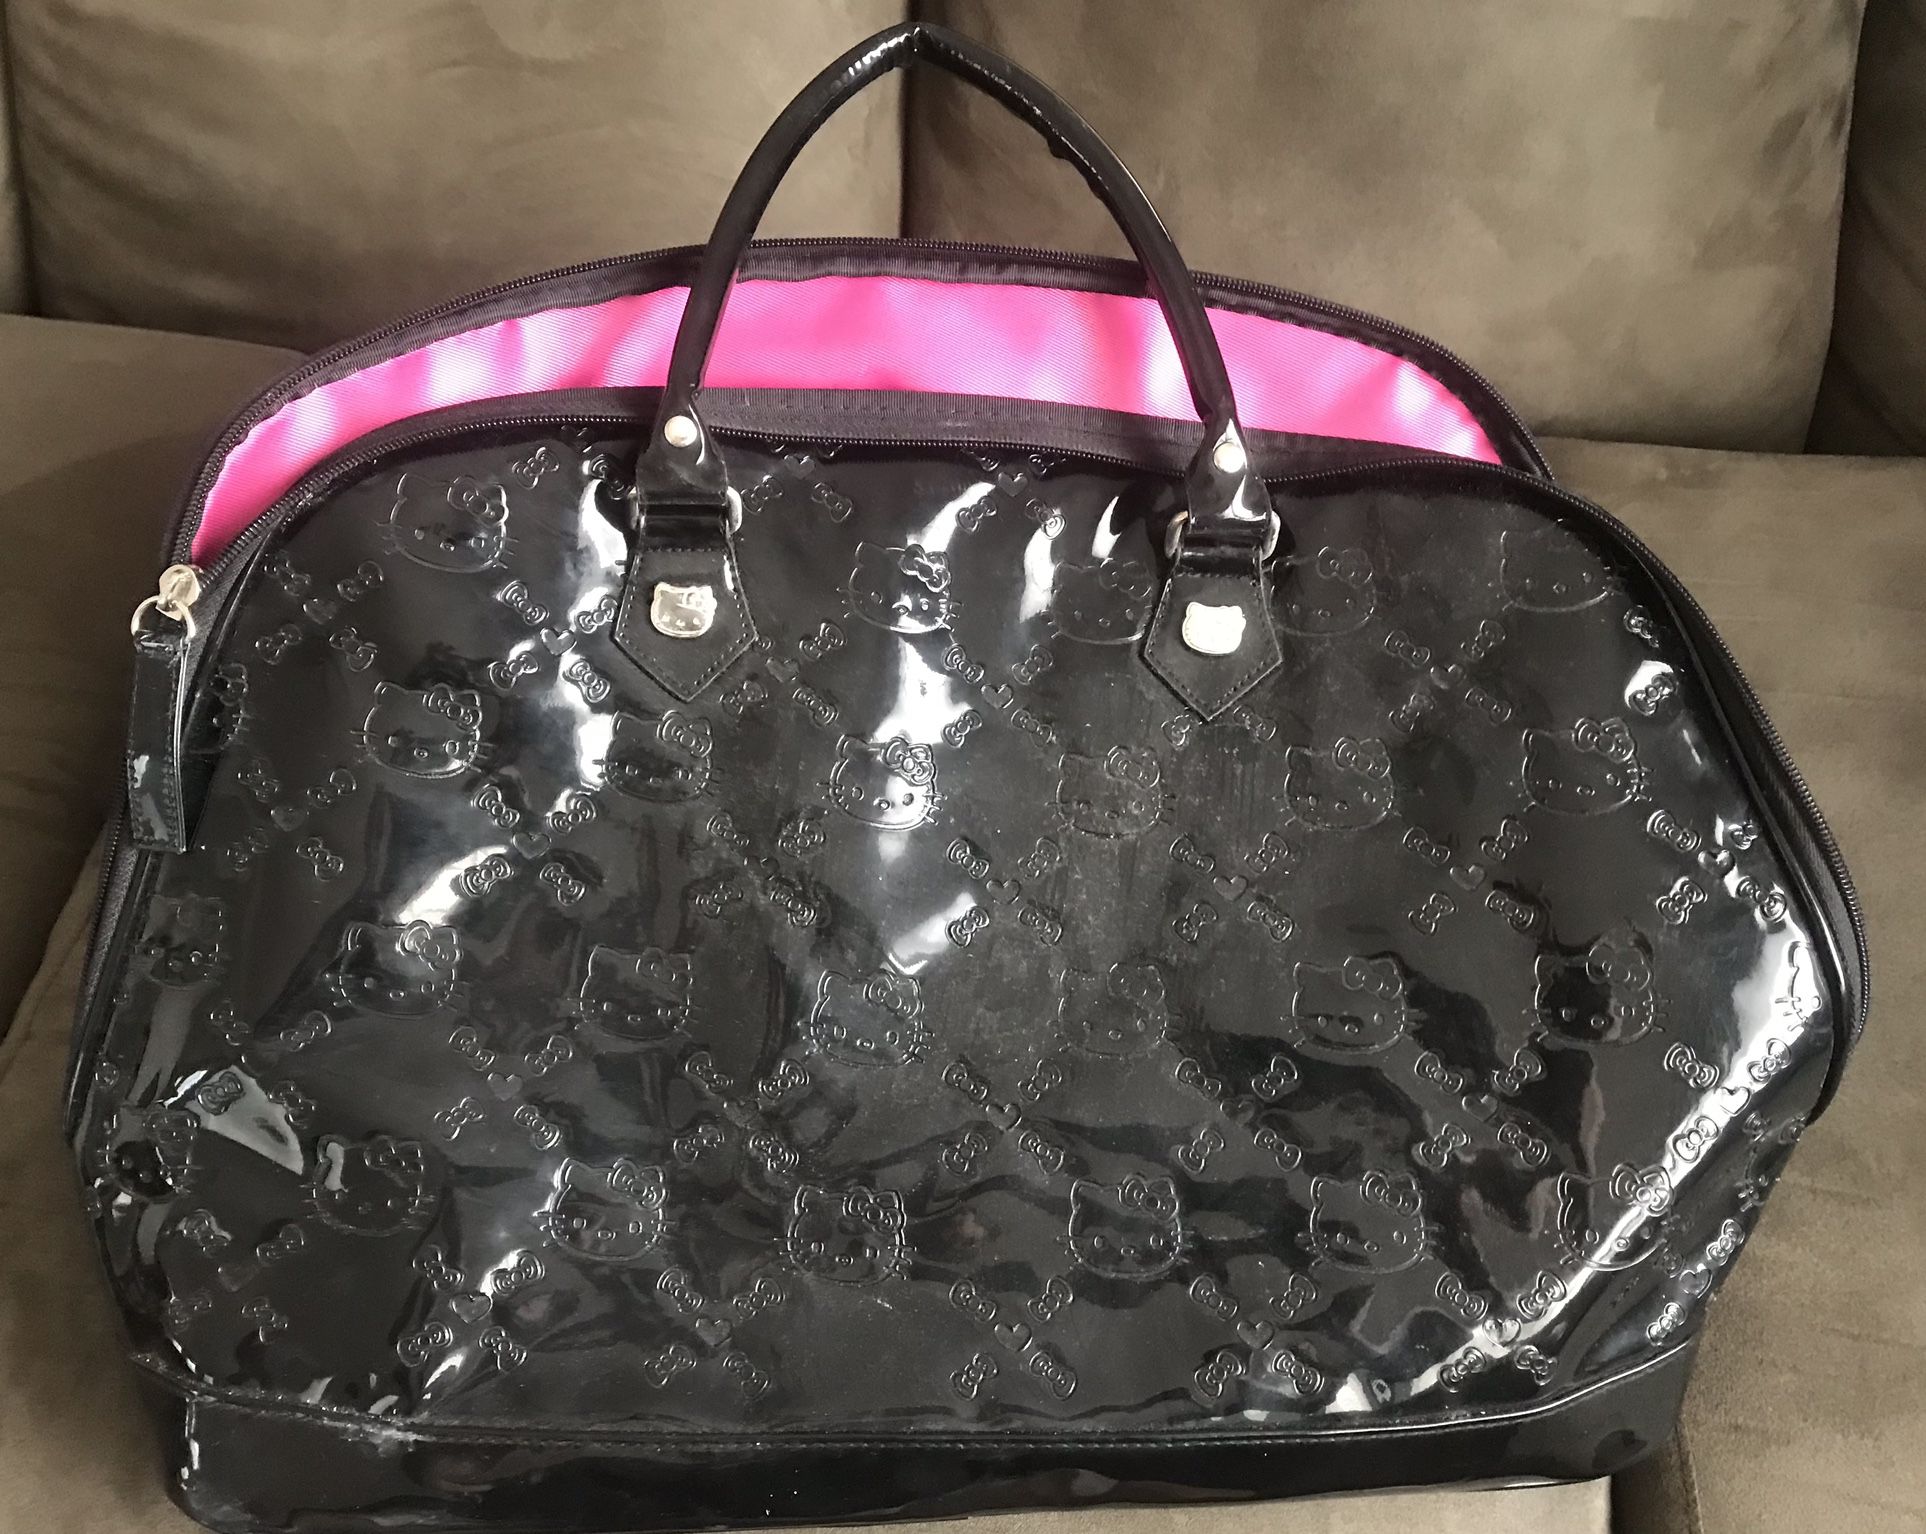 Loungefly Loves Hello Kitty Purse for Sale in Tucson, AZ - OfferUp